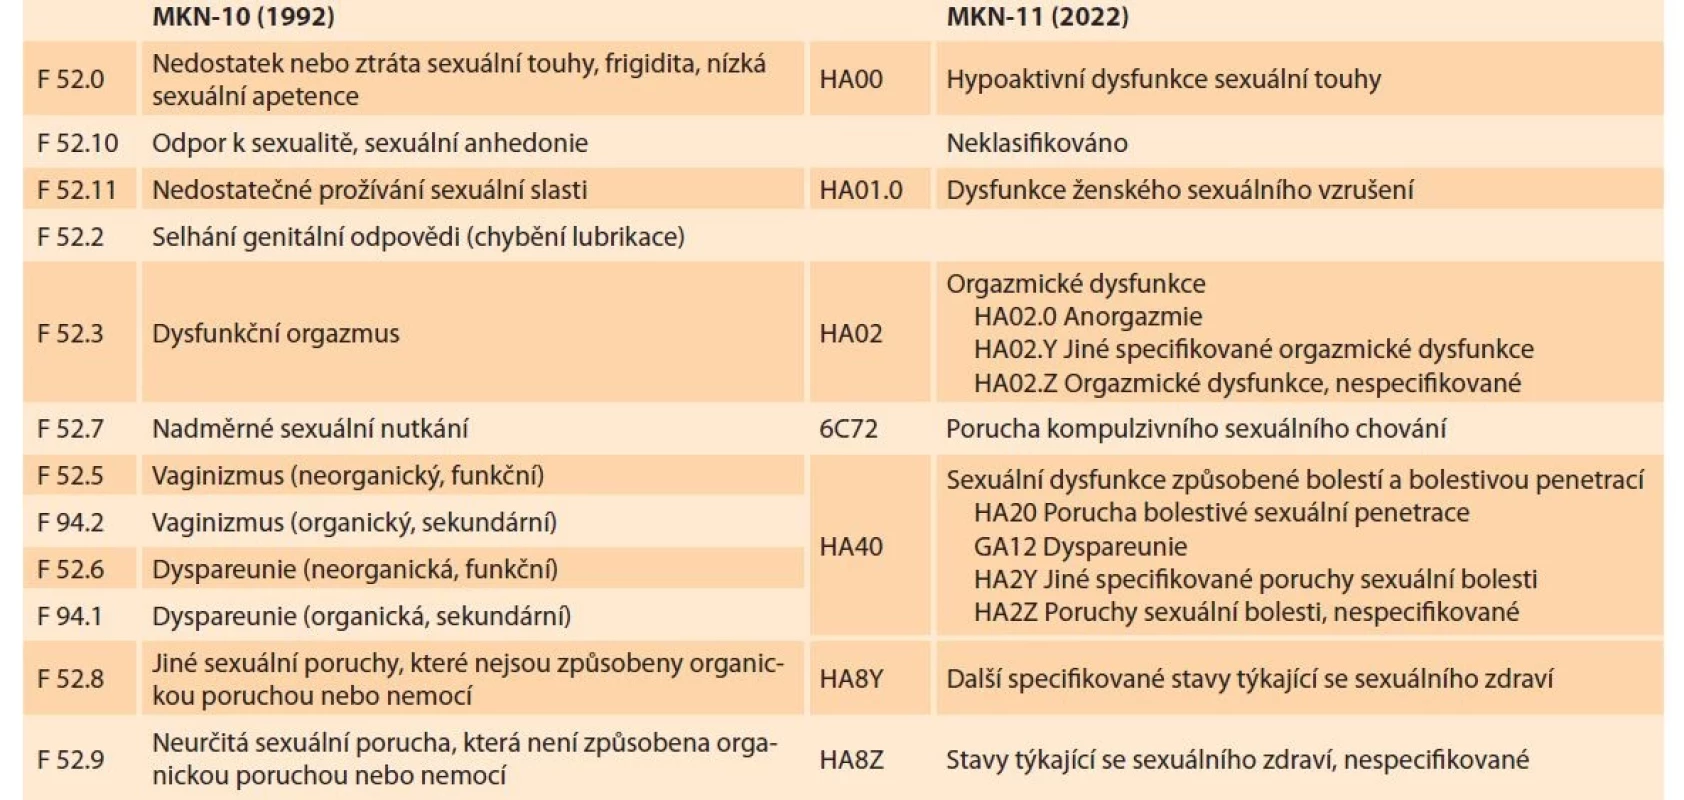 Komparativní tabulka klasifikace MKN-10 (1992) a MKN-11 (2022).<br>
Tab. 1. Comparative table of ICD-10 (1992) and ICD-11 (2022) classifications.